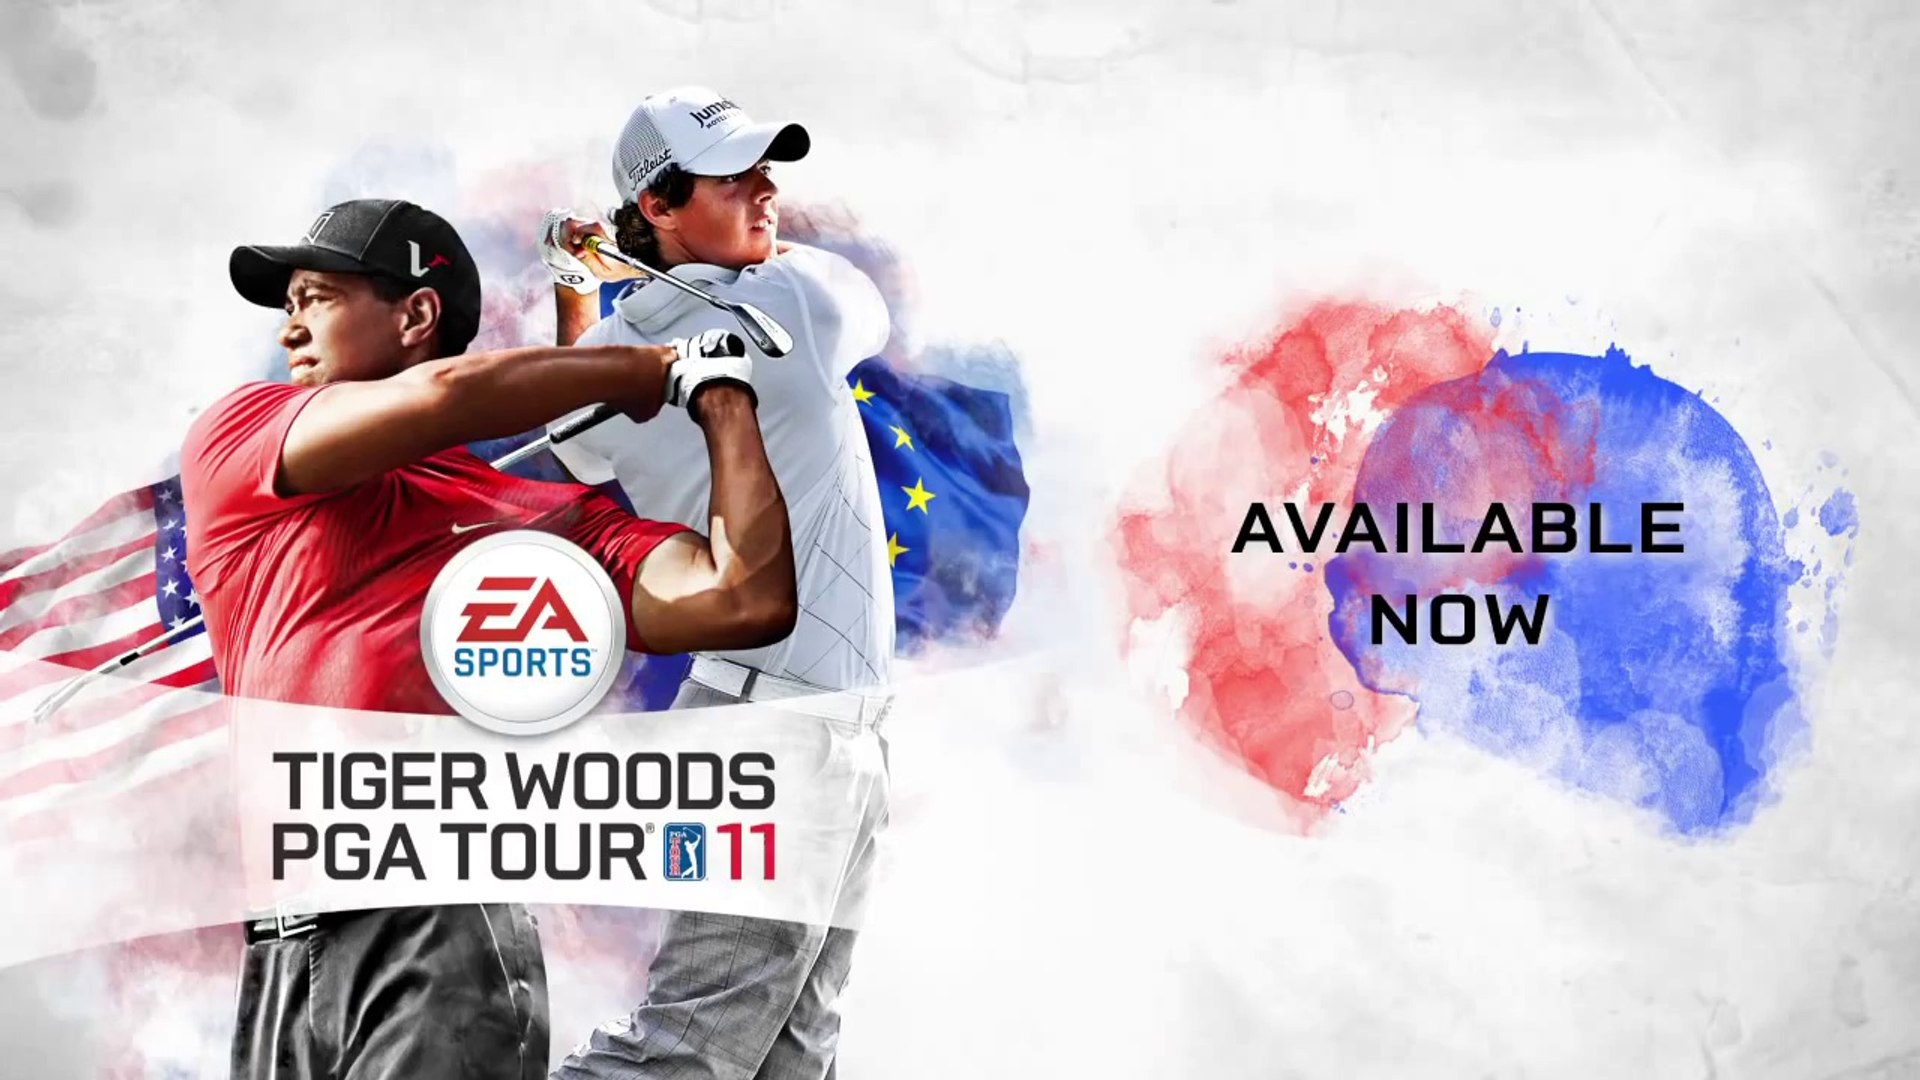 Tiger Woods PGA TOUR 11 PS3 Xbox 360 Launch Trailer - video Dailymotion